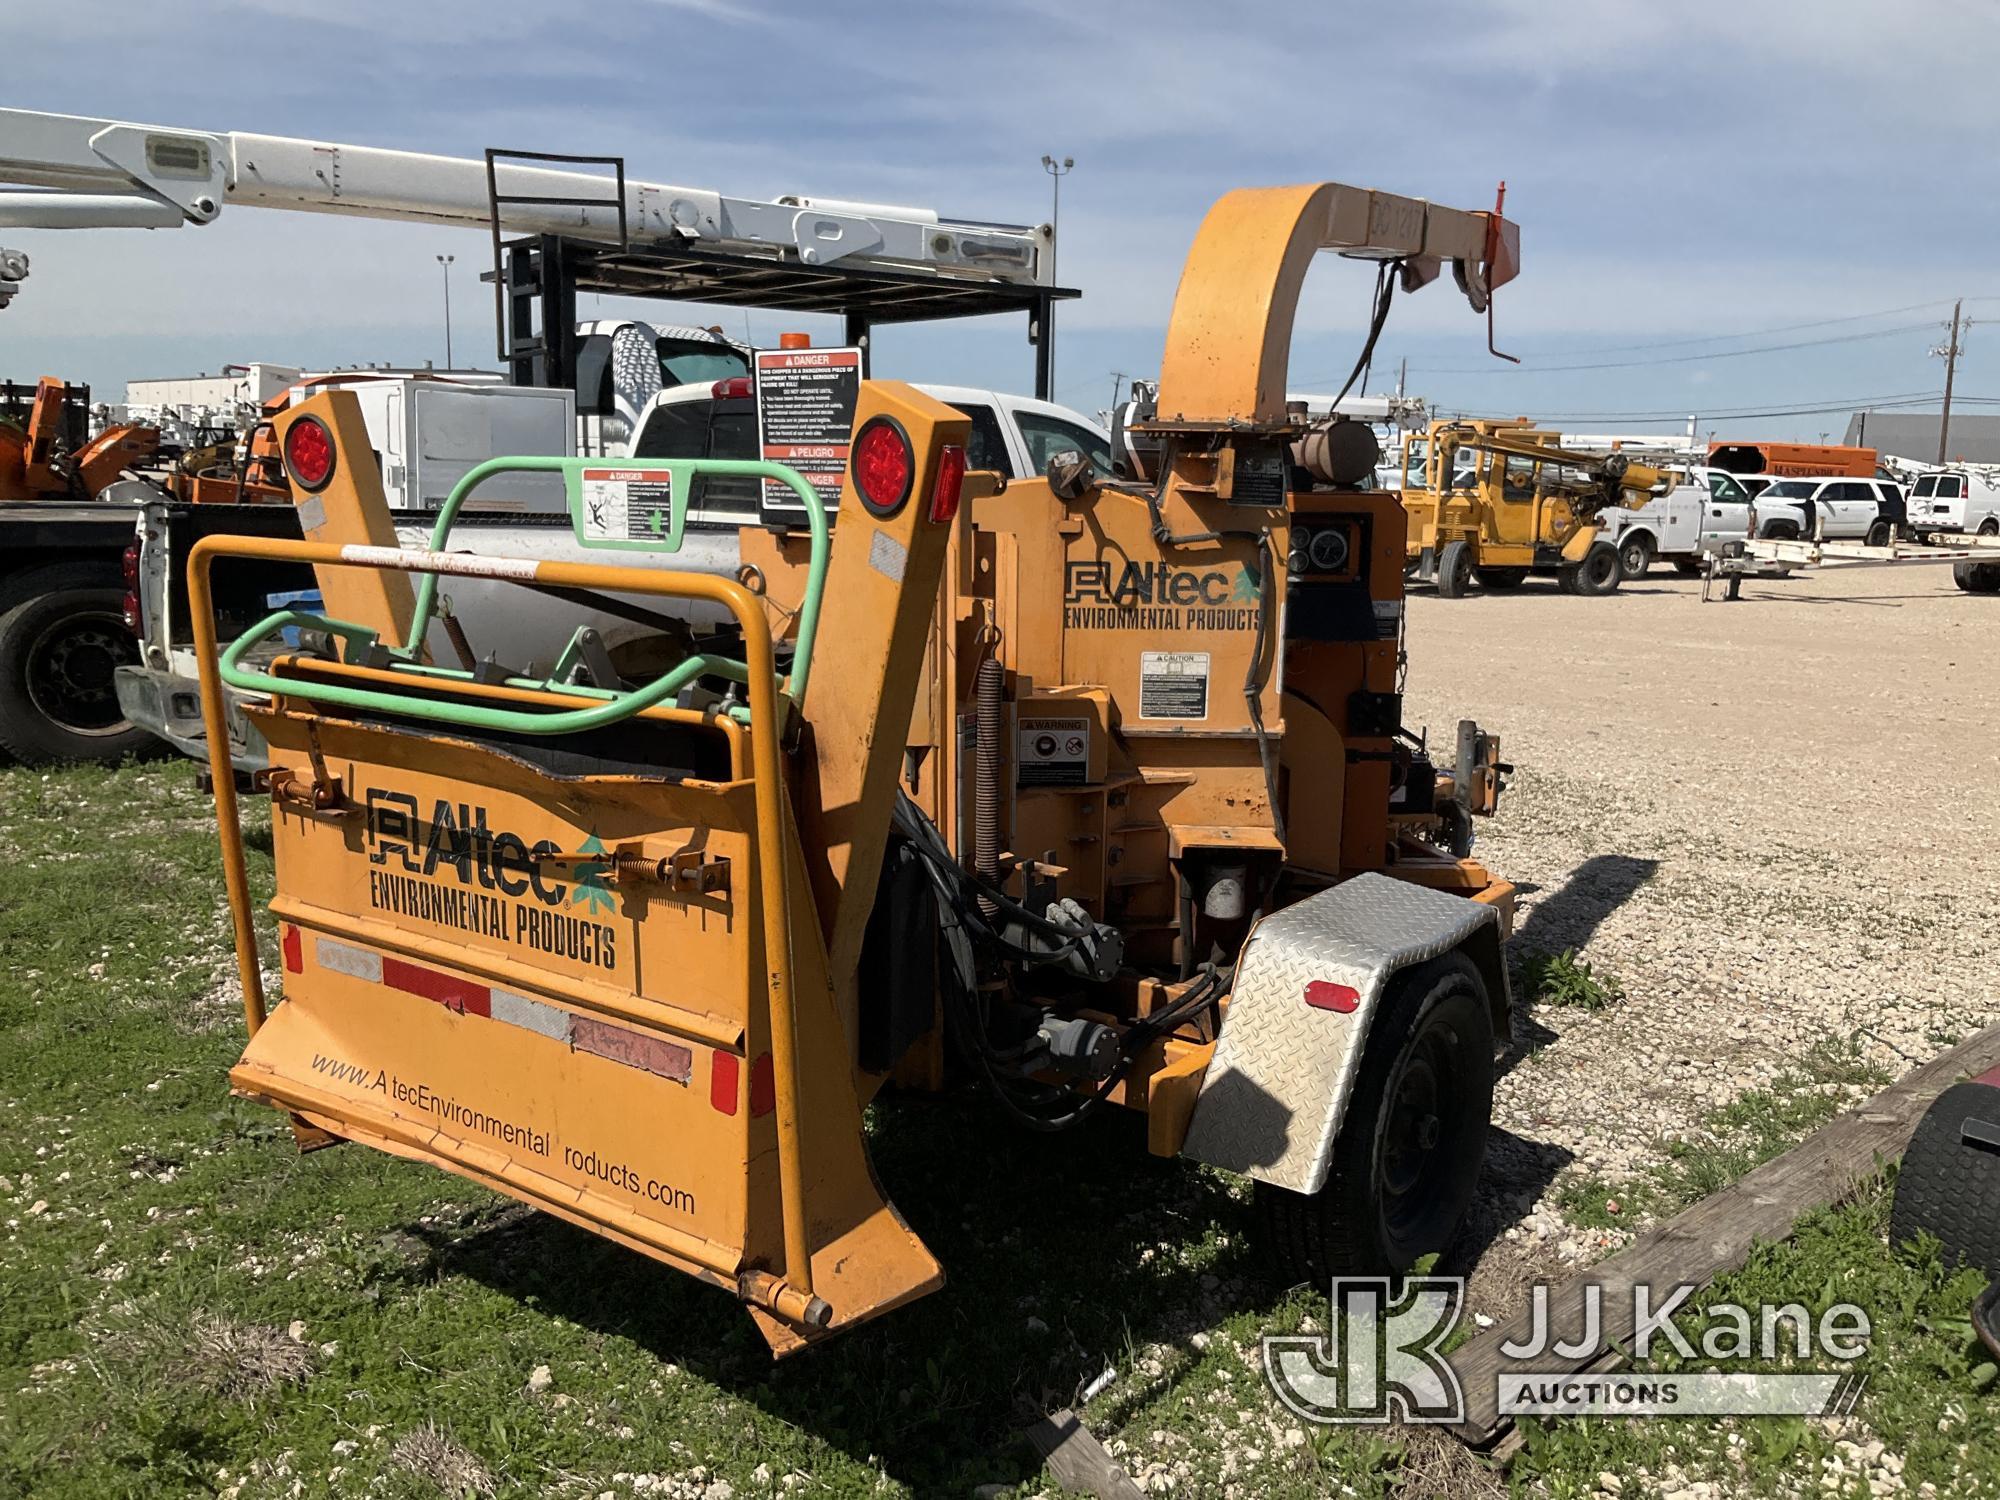 (Waxahachie, TX) 2008 Altec DC1217 Chipper (12in Drum) No Title) (Not Running, Condition unknown